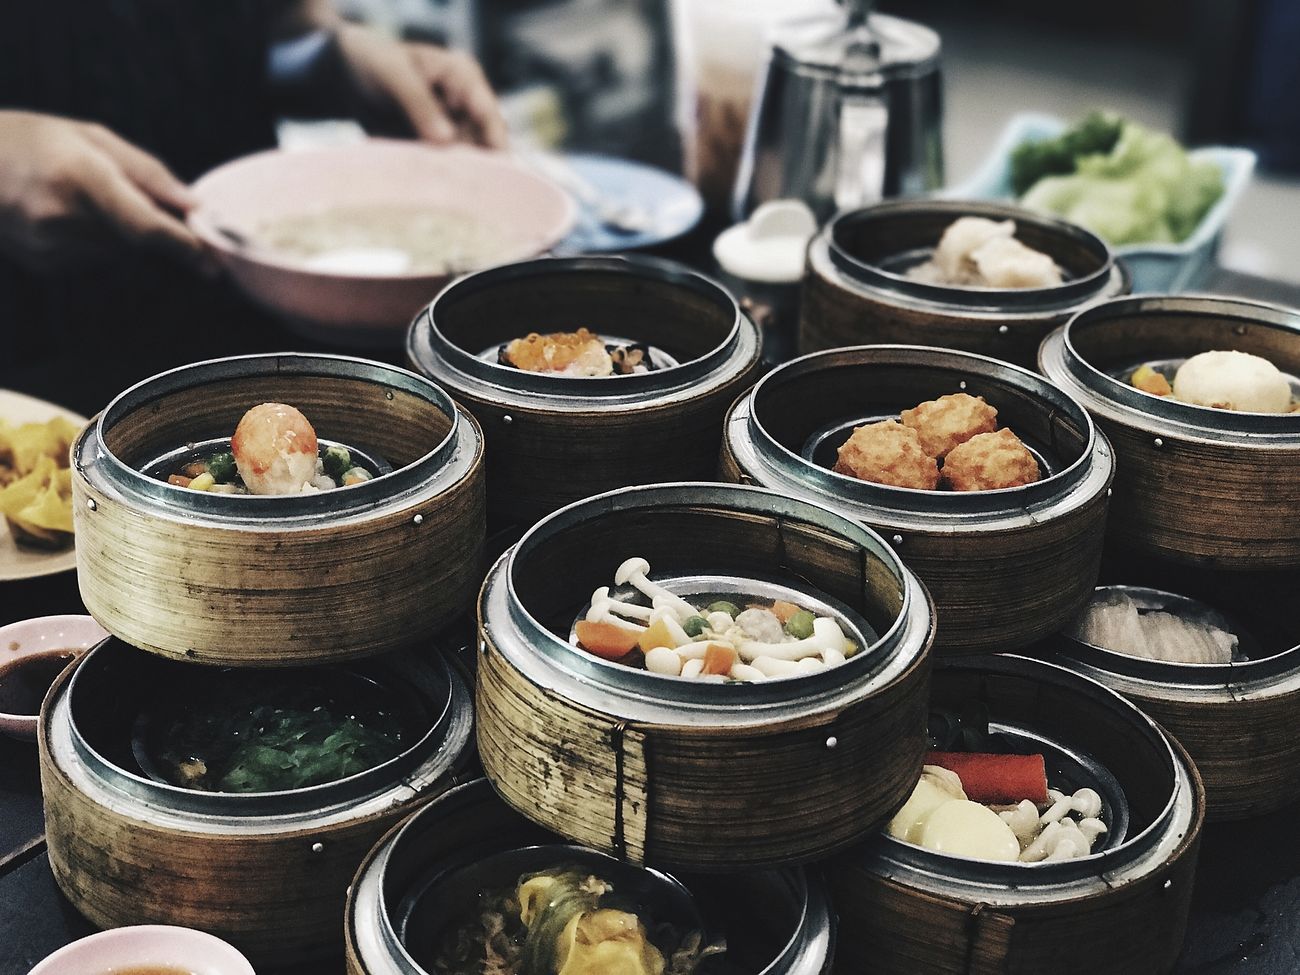 Not sure what to order at dim sum?